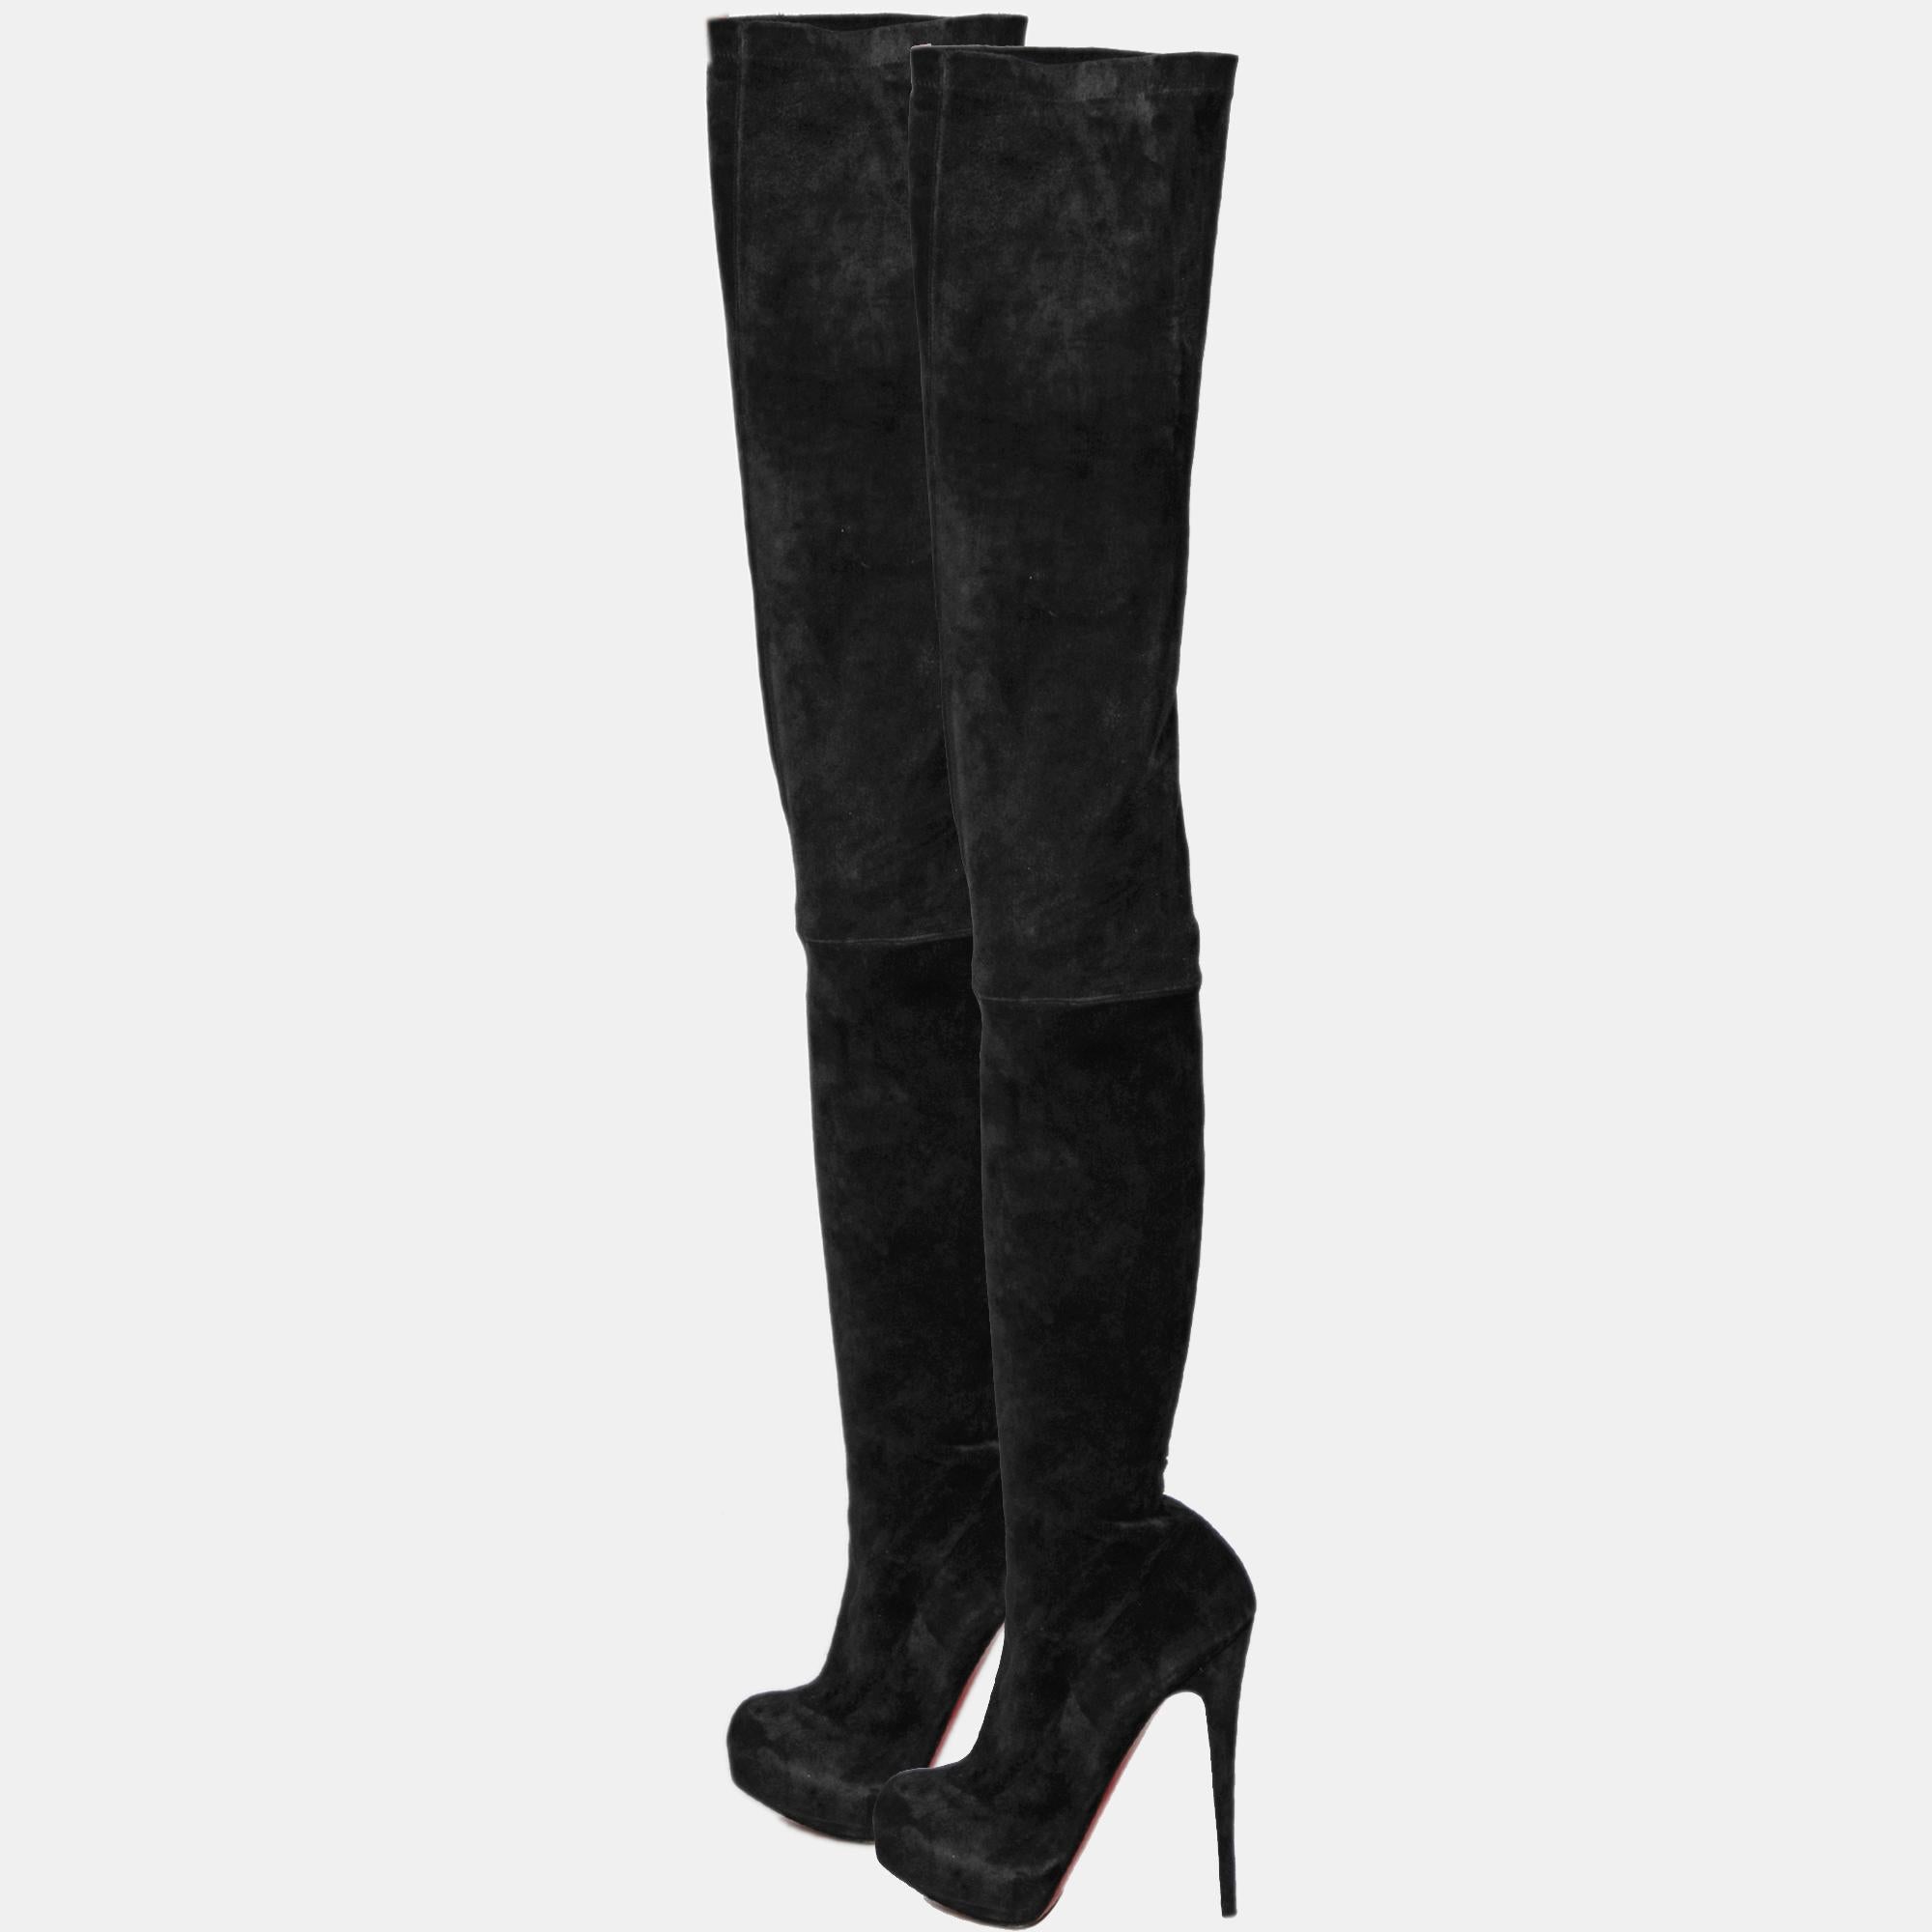 Women's Christian Louboutin Black Suede Monica Over the Knee Boots Size 41.5